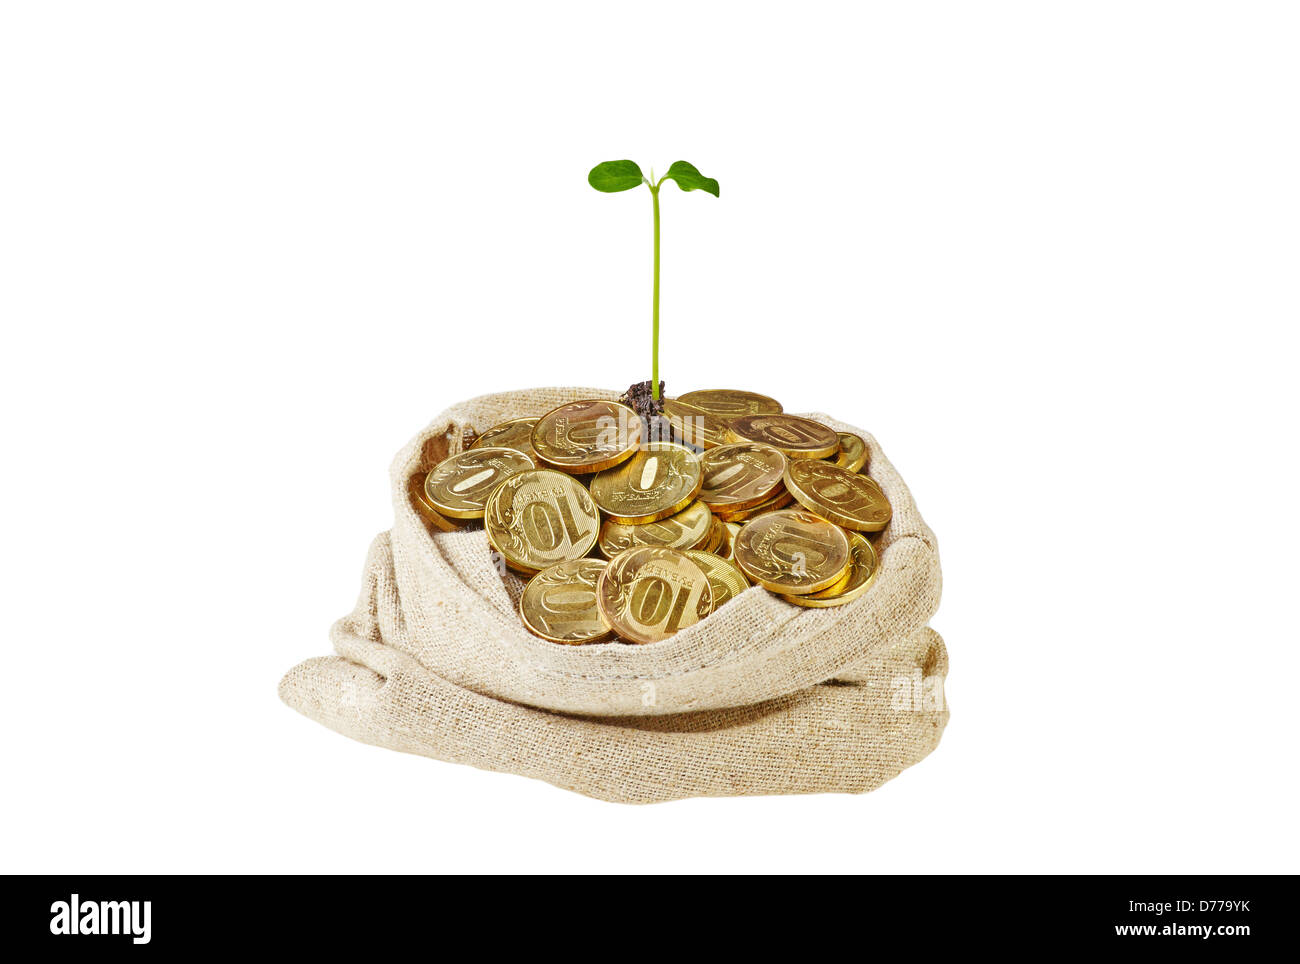 Canvas bag full with gold coins and a gentle green sprout. Isolated on white Stock Photo